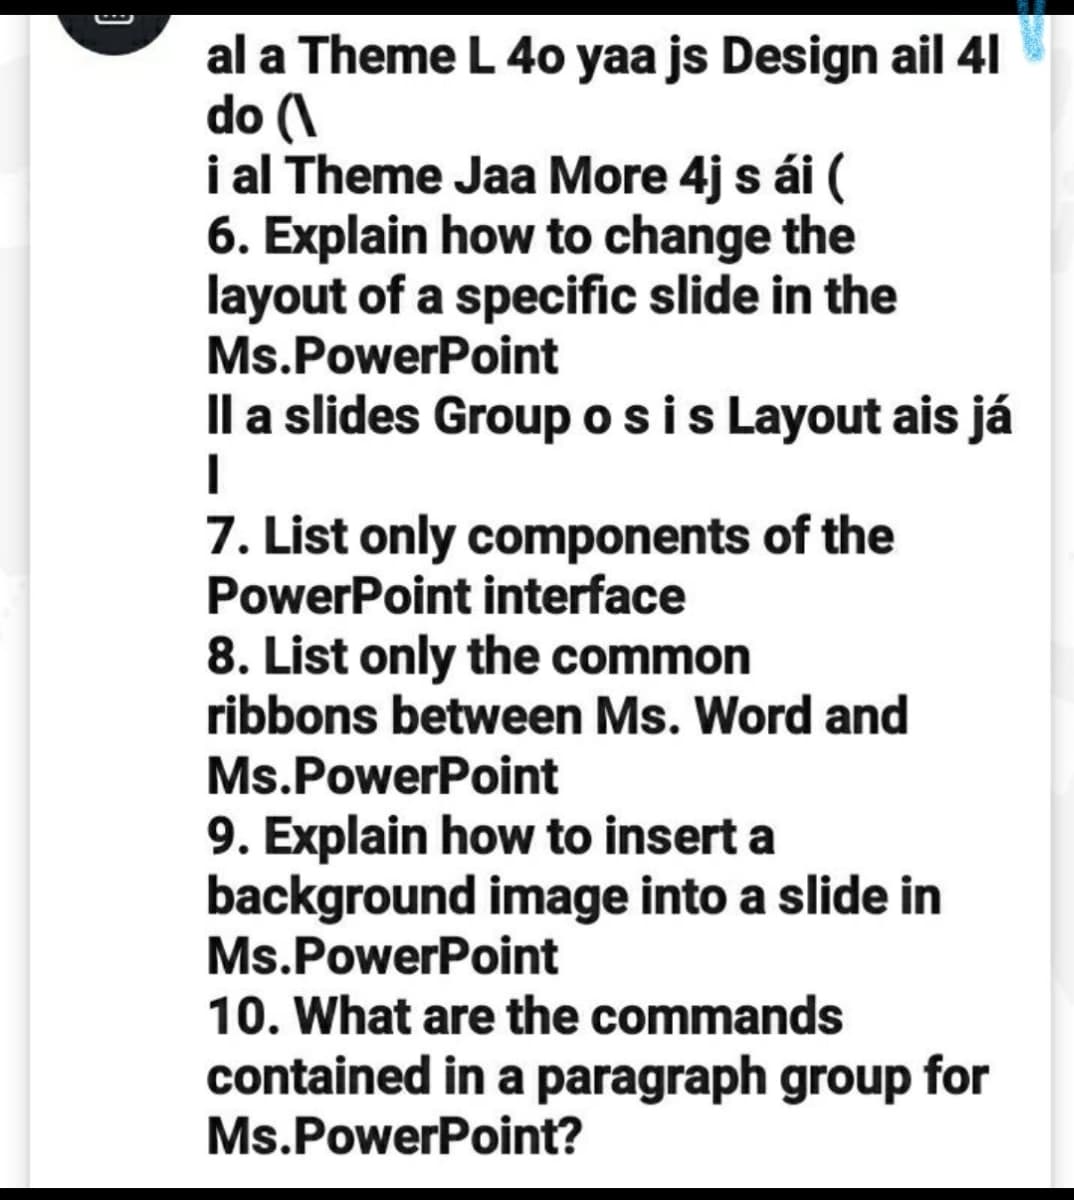 al a Theme L 40 yaa js Design ail 41
do (\
i al Theme Jaa More 4j s ái (
6. Explain how to change the
layout of a specific slide in the
Ms.PowerPoint
Il a slides Group osis Layout ais já
7. List only components of the
PowerPoint interface
8. List only the common
ribbons between Ms. Word and
Ms.PowerPoint
9. Explain how to insert a
background image into a slide in
Ms.PowerPoint
10. What are the commands
contained in a paragraph group for
Ms.PowerPoint?
